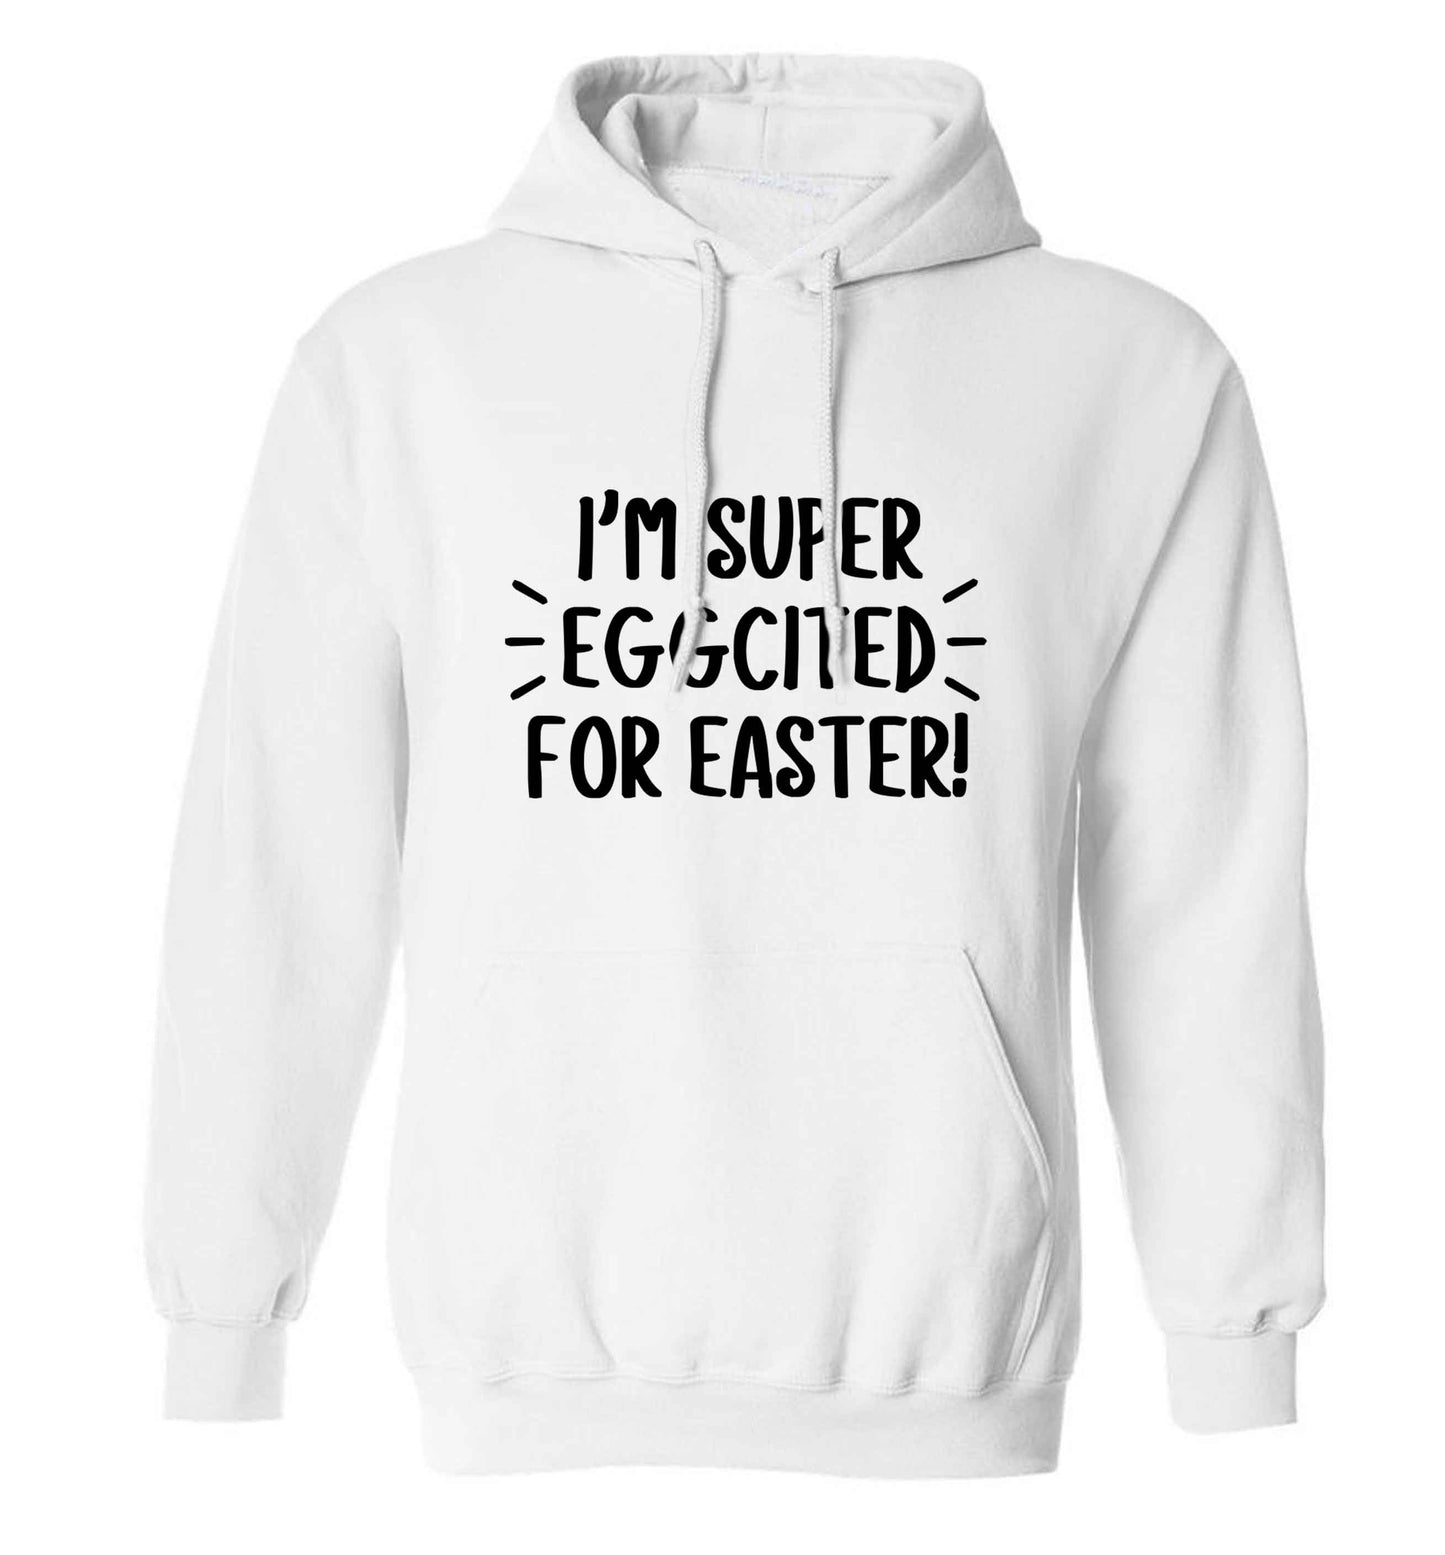 I'm super eggcited for Easter adults unisex white hoodie 2XL